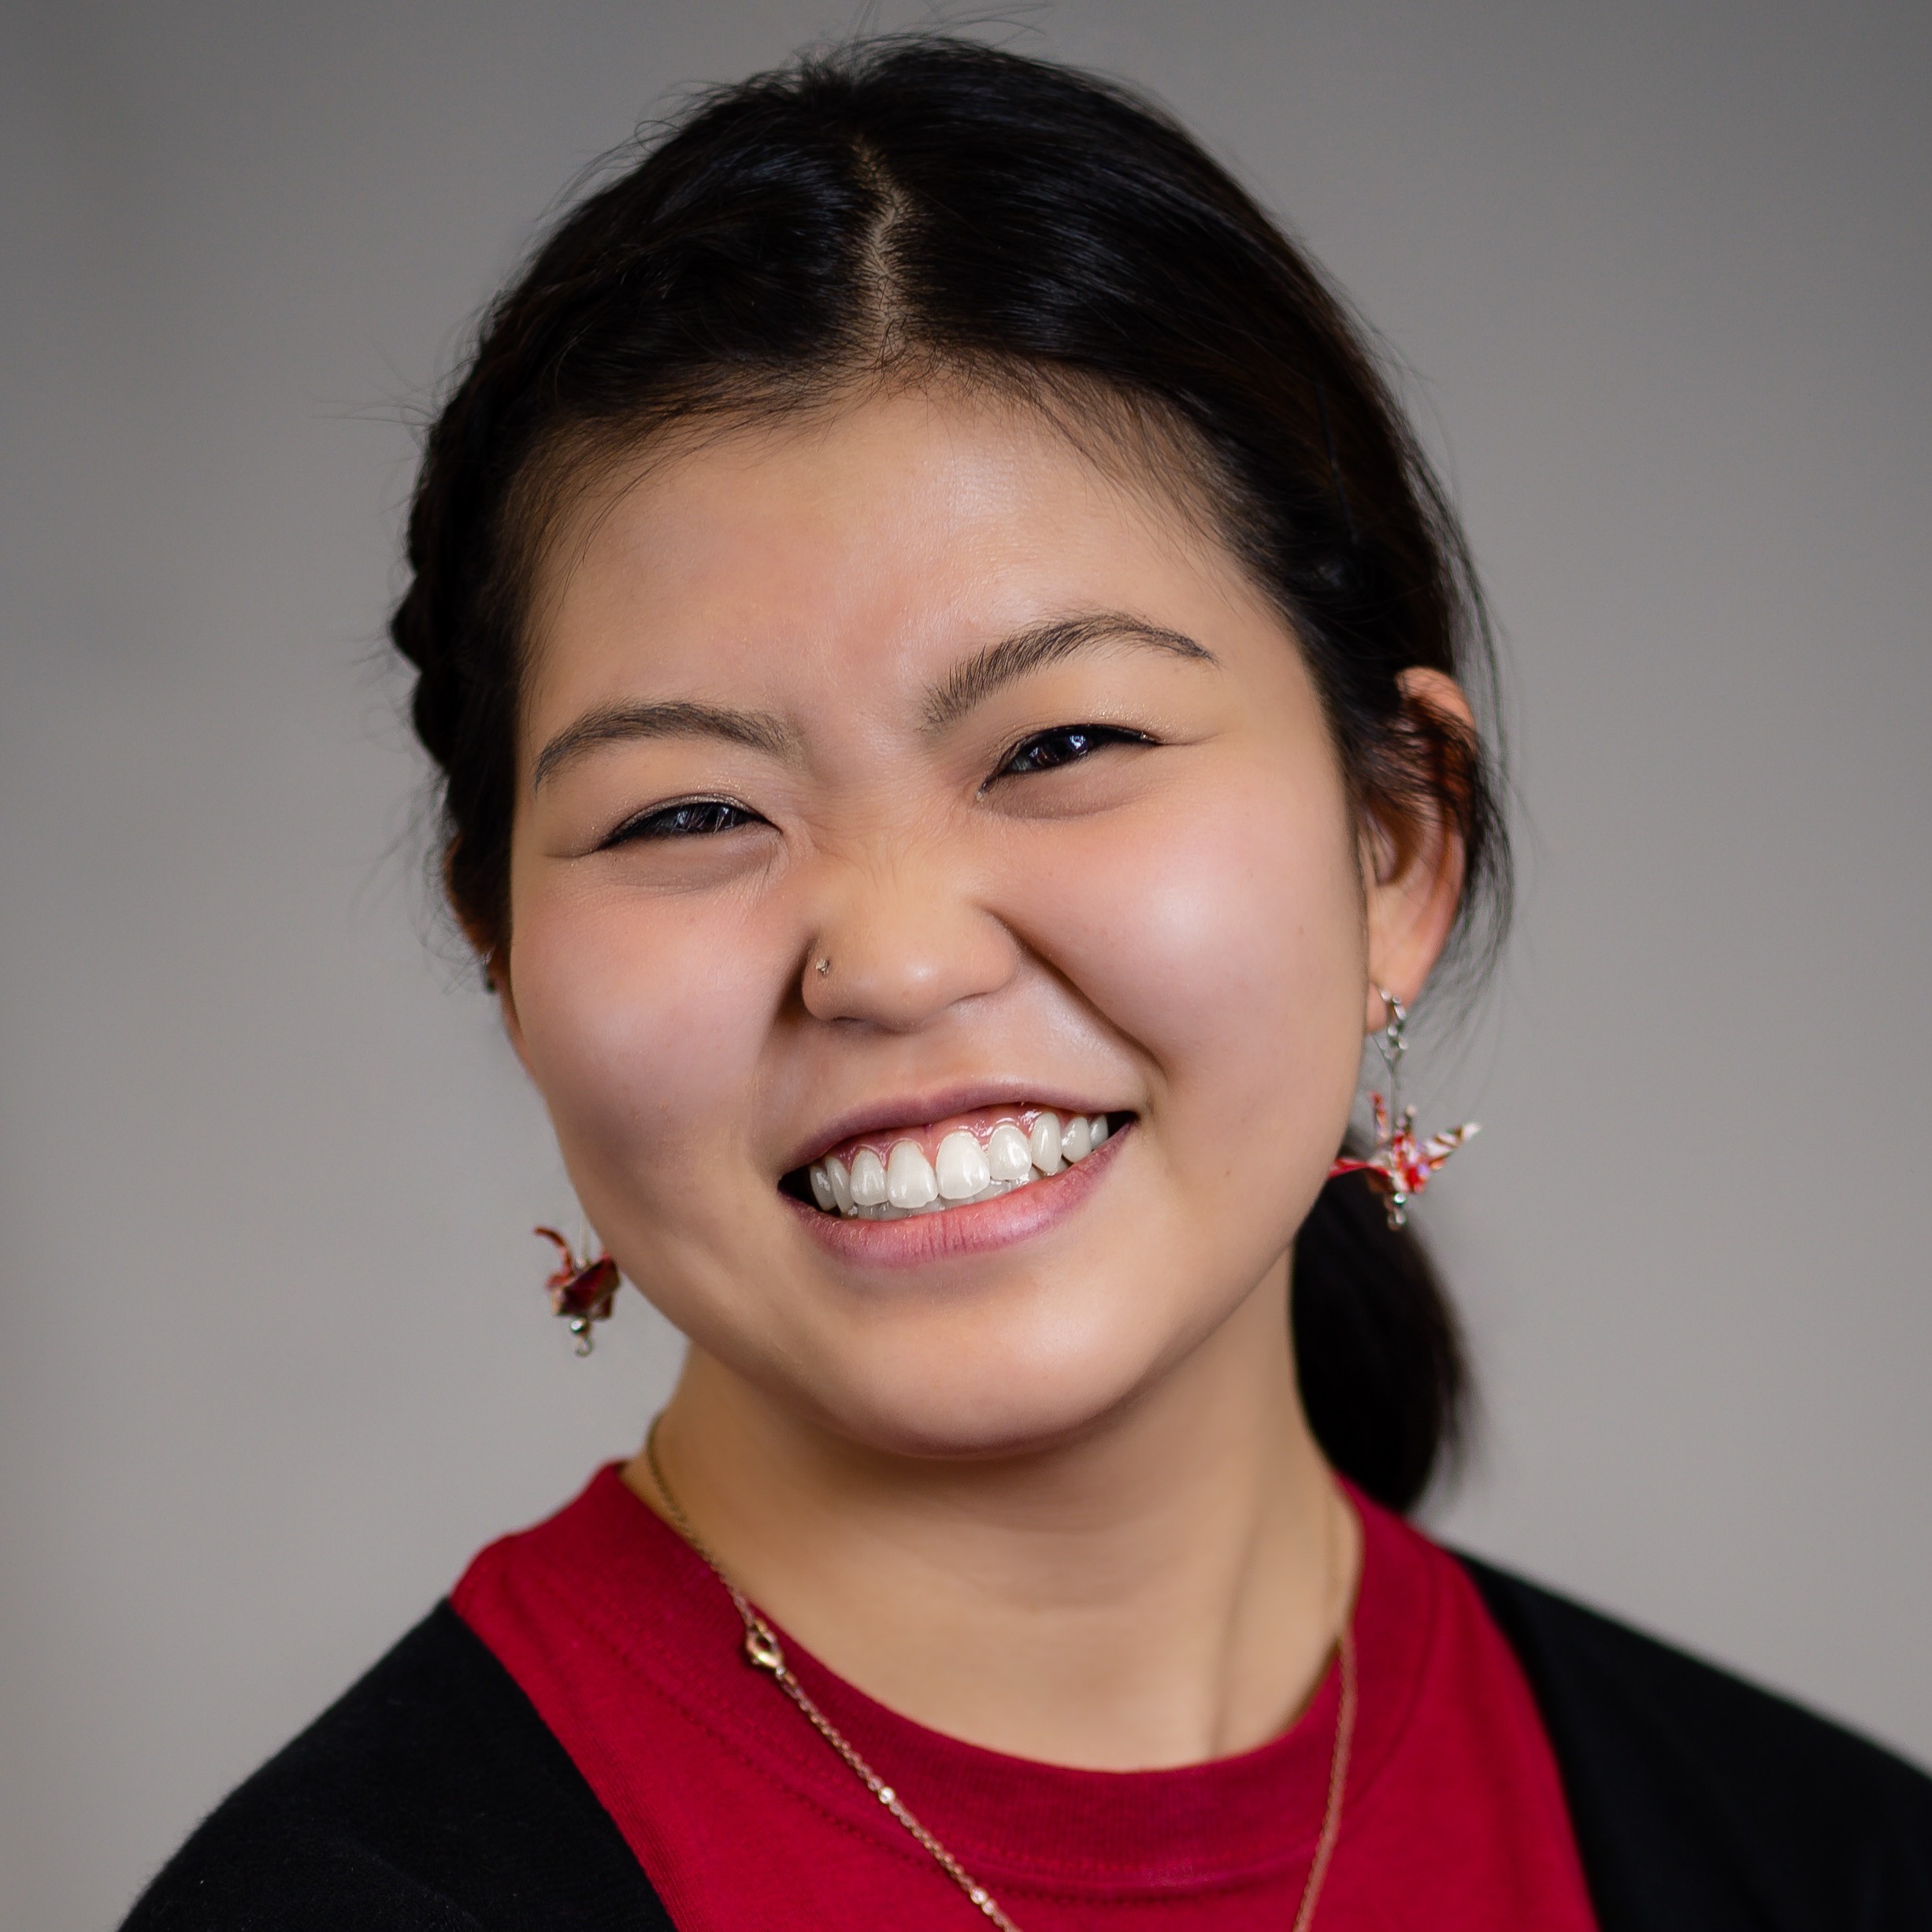 A smiling Asian person with a red shirt and paper crane earrings.